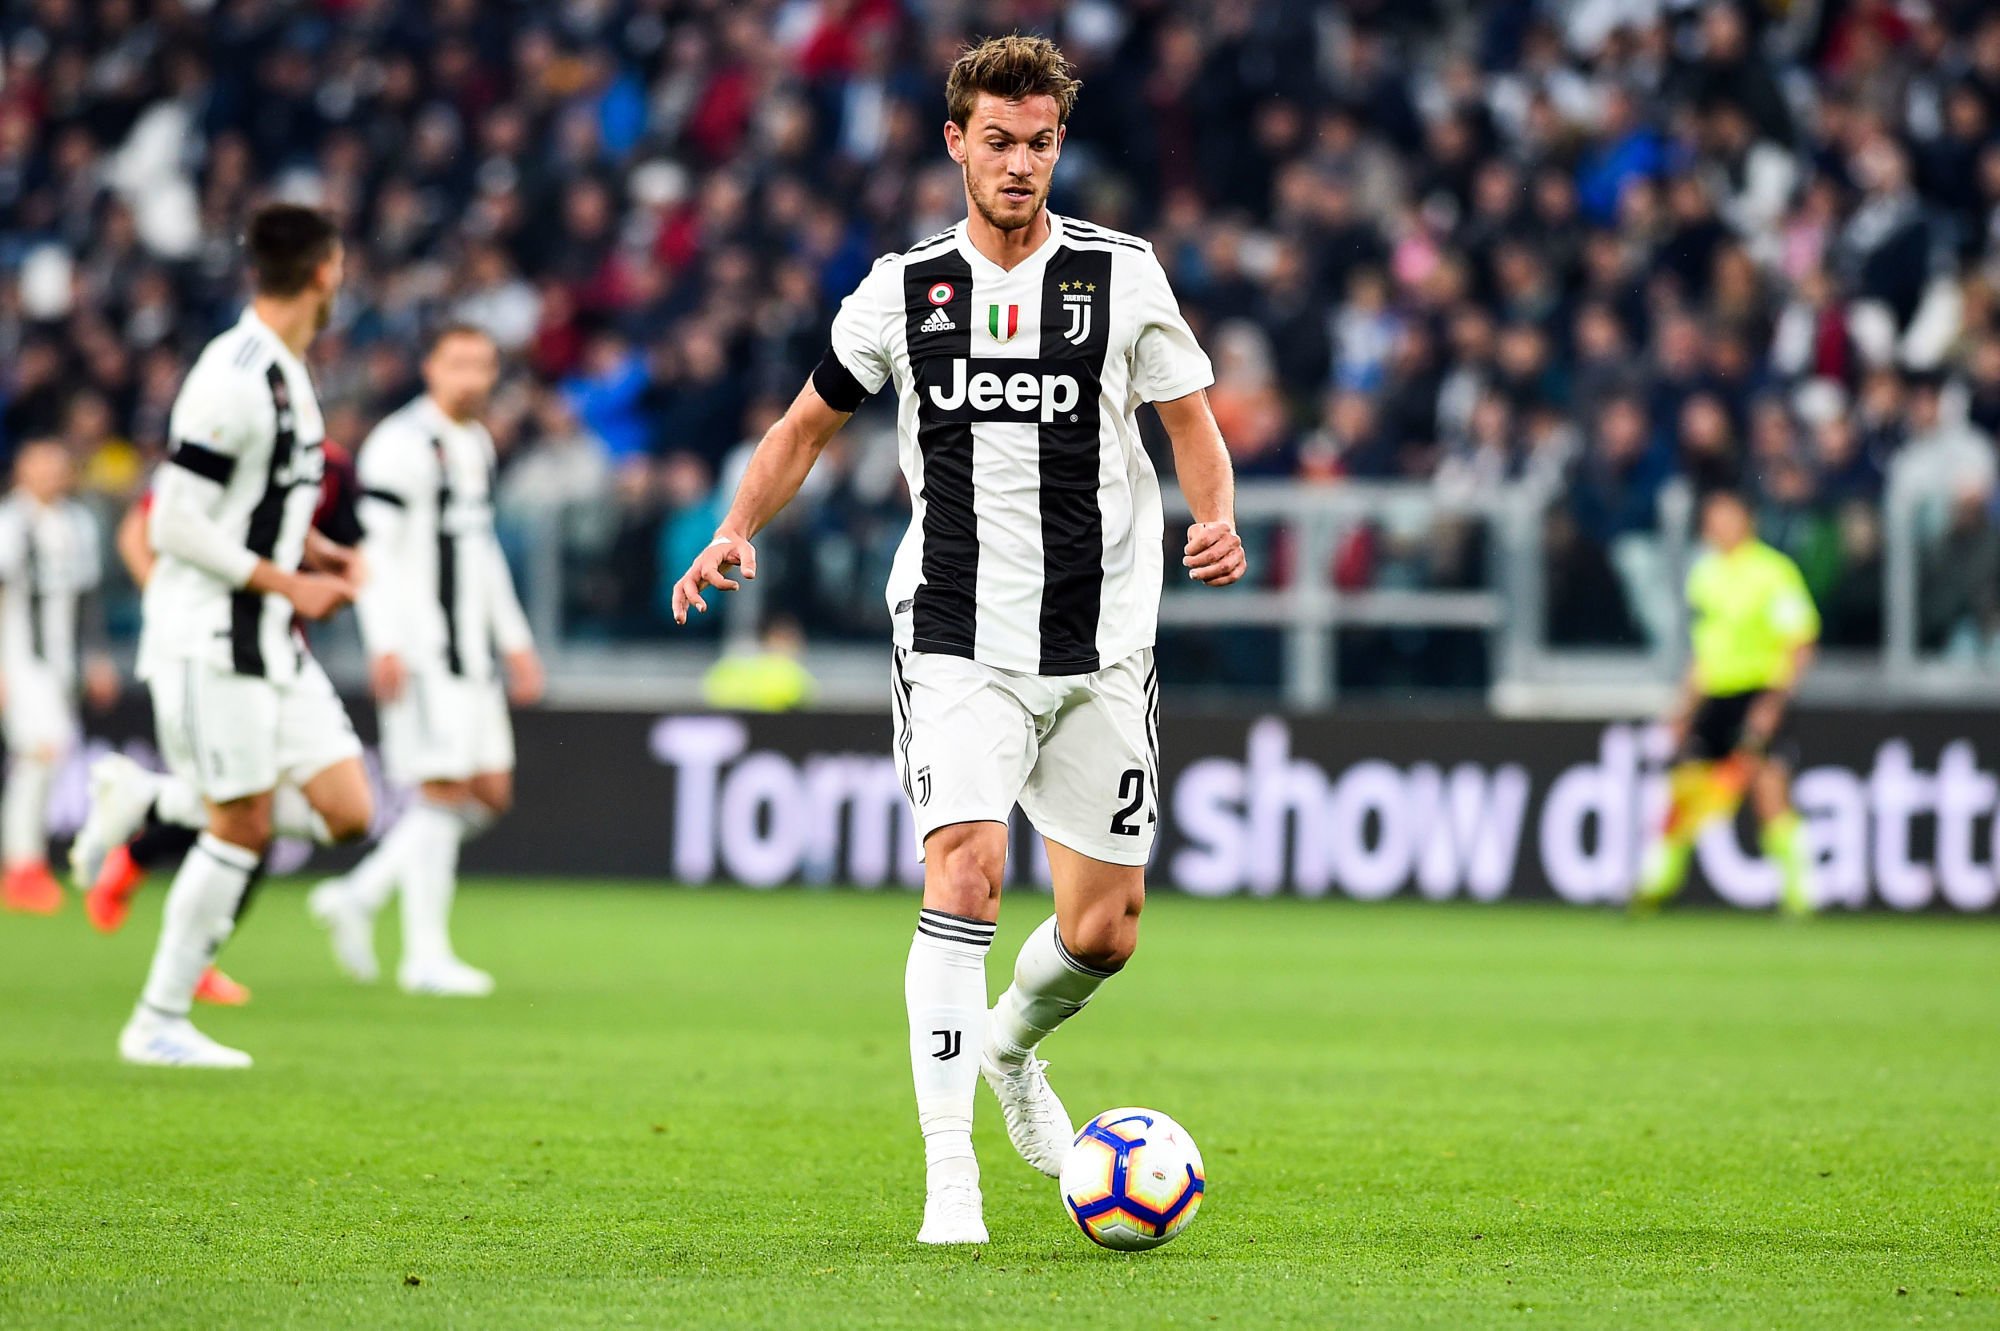 Daniele Rugani during the Serie A match at Allianz Stadium Turin. Picture date: 6th April 2019. 
Photo : Ipp / Icon Sport